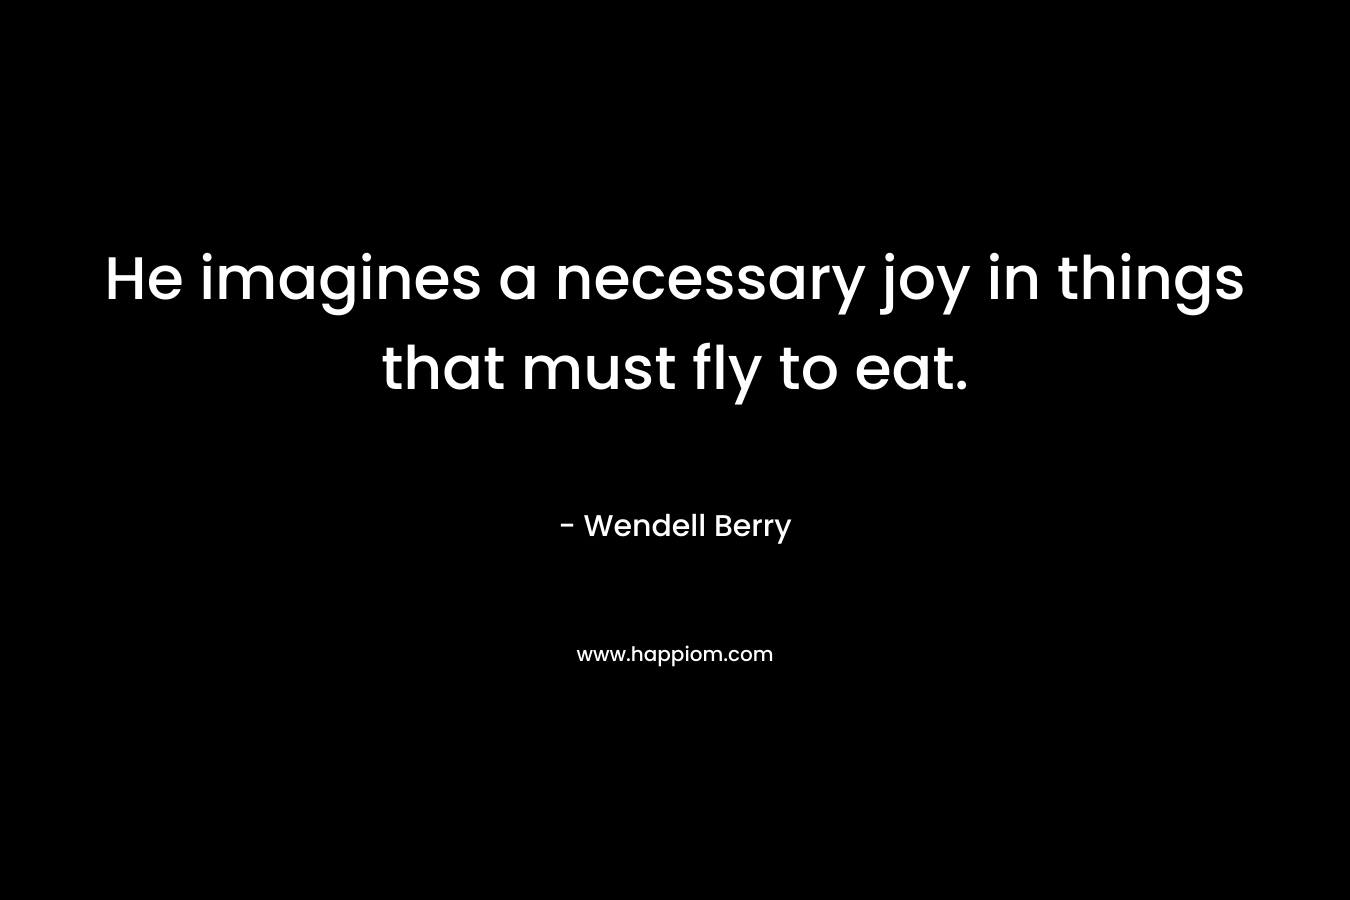 He imagines a necessary joy in things that must fly to eat.